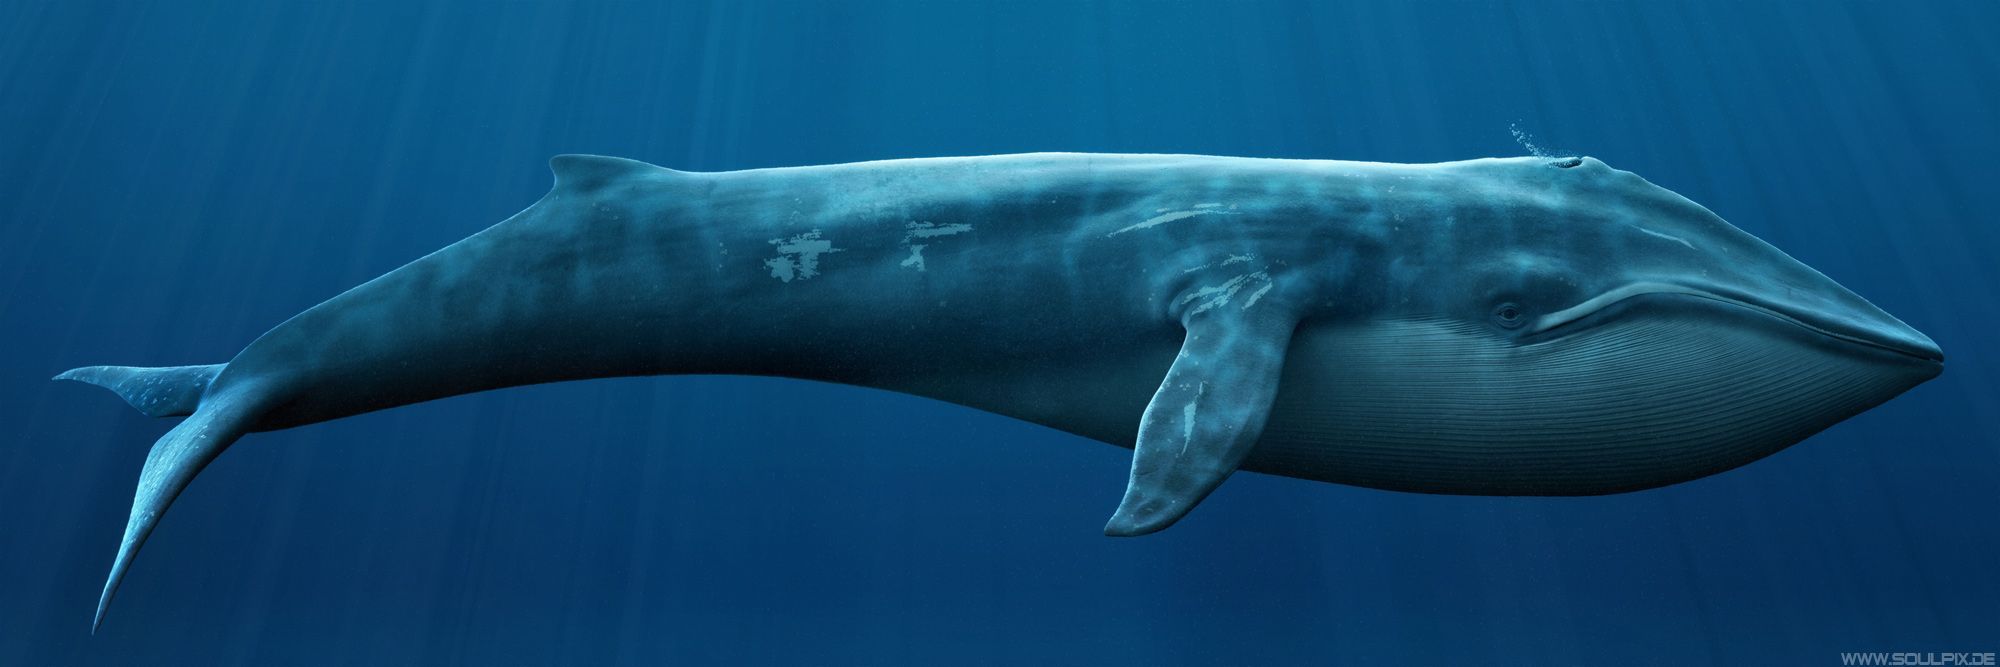 Blue Whale 6 - High Definition Widescreen Backgrounds